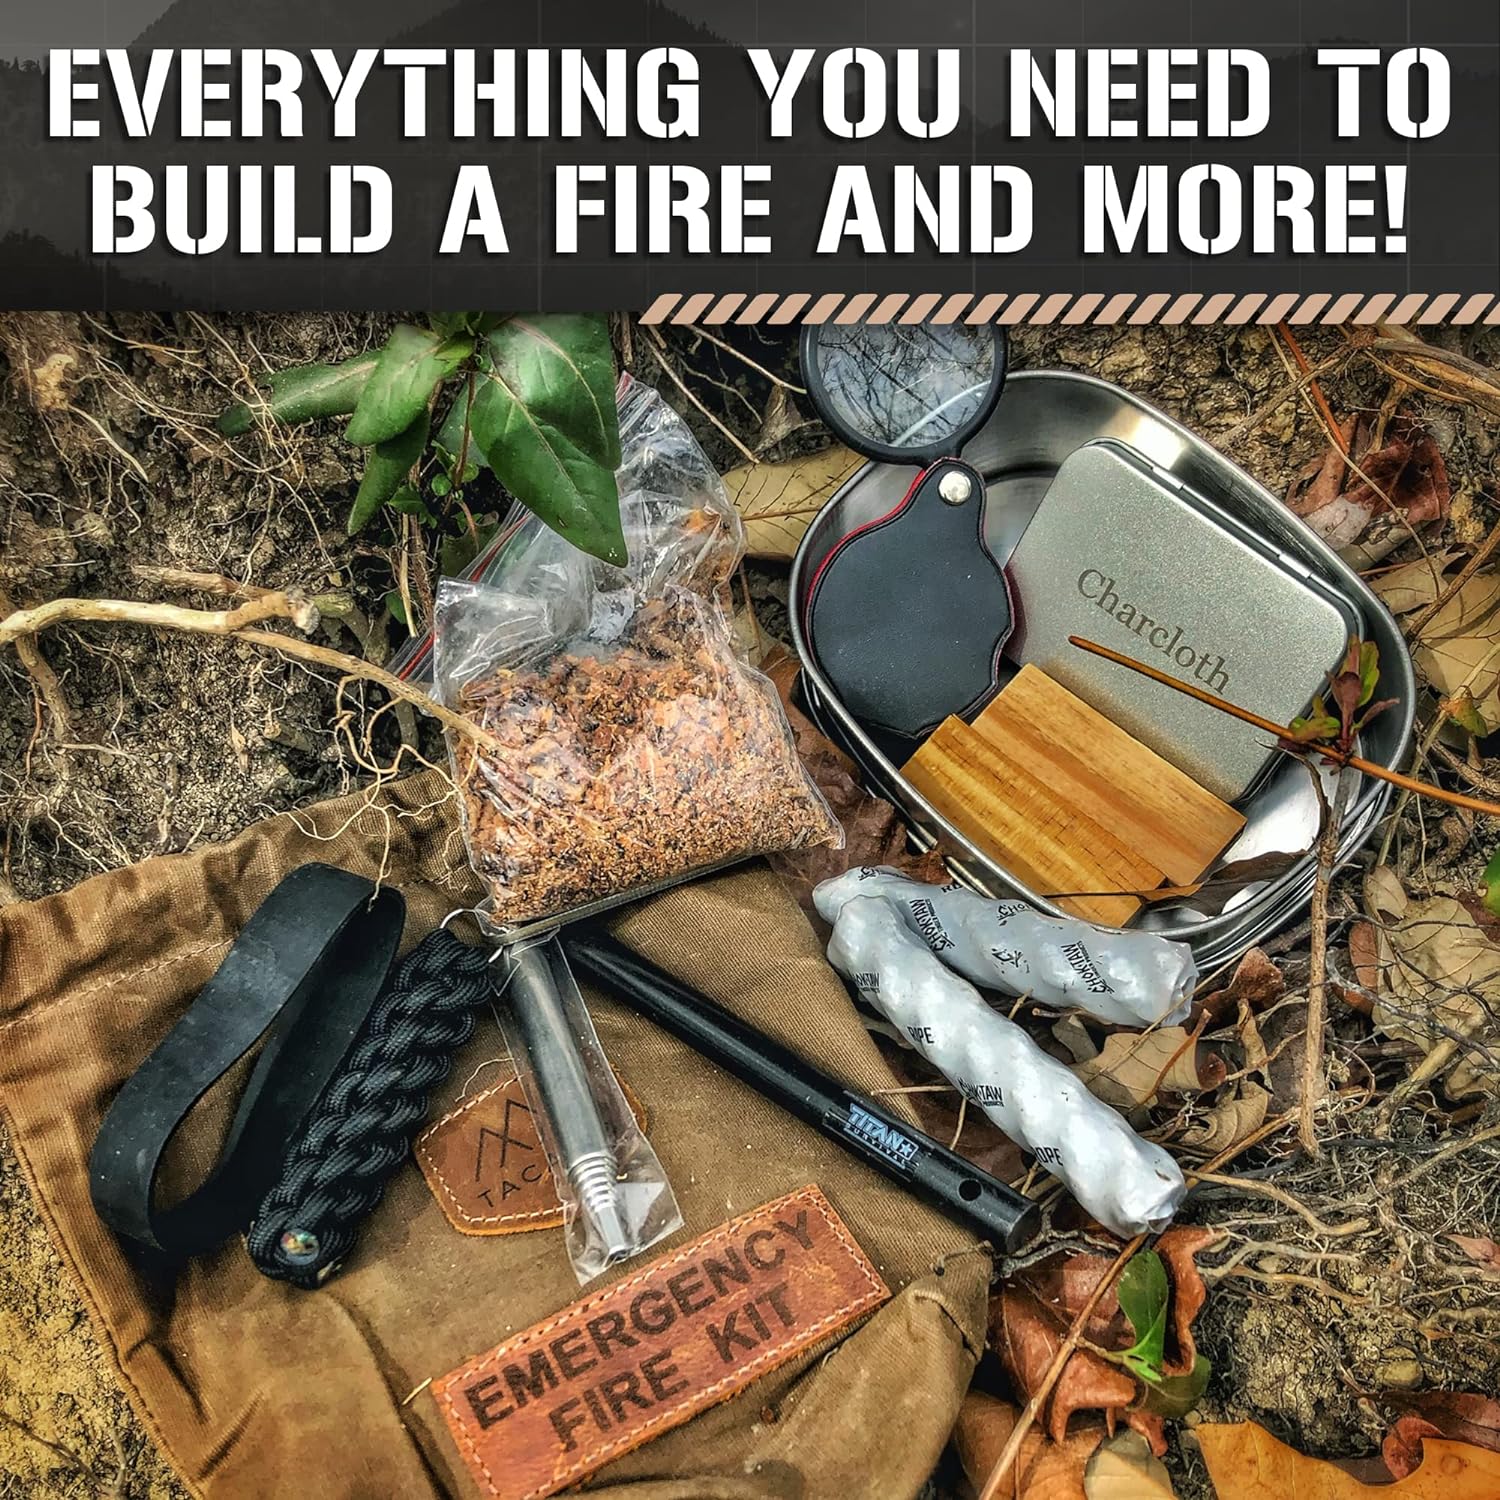 Emergency Fire Starting Kit Review